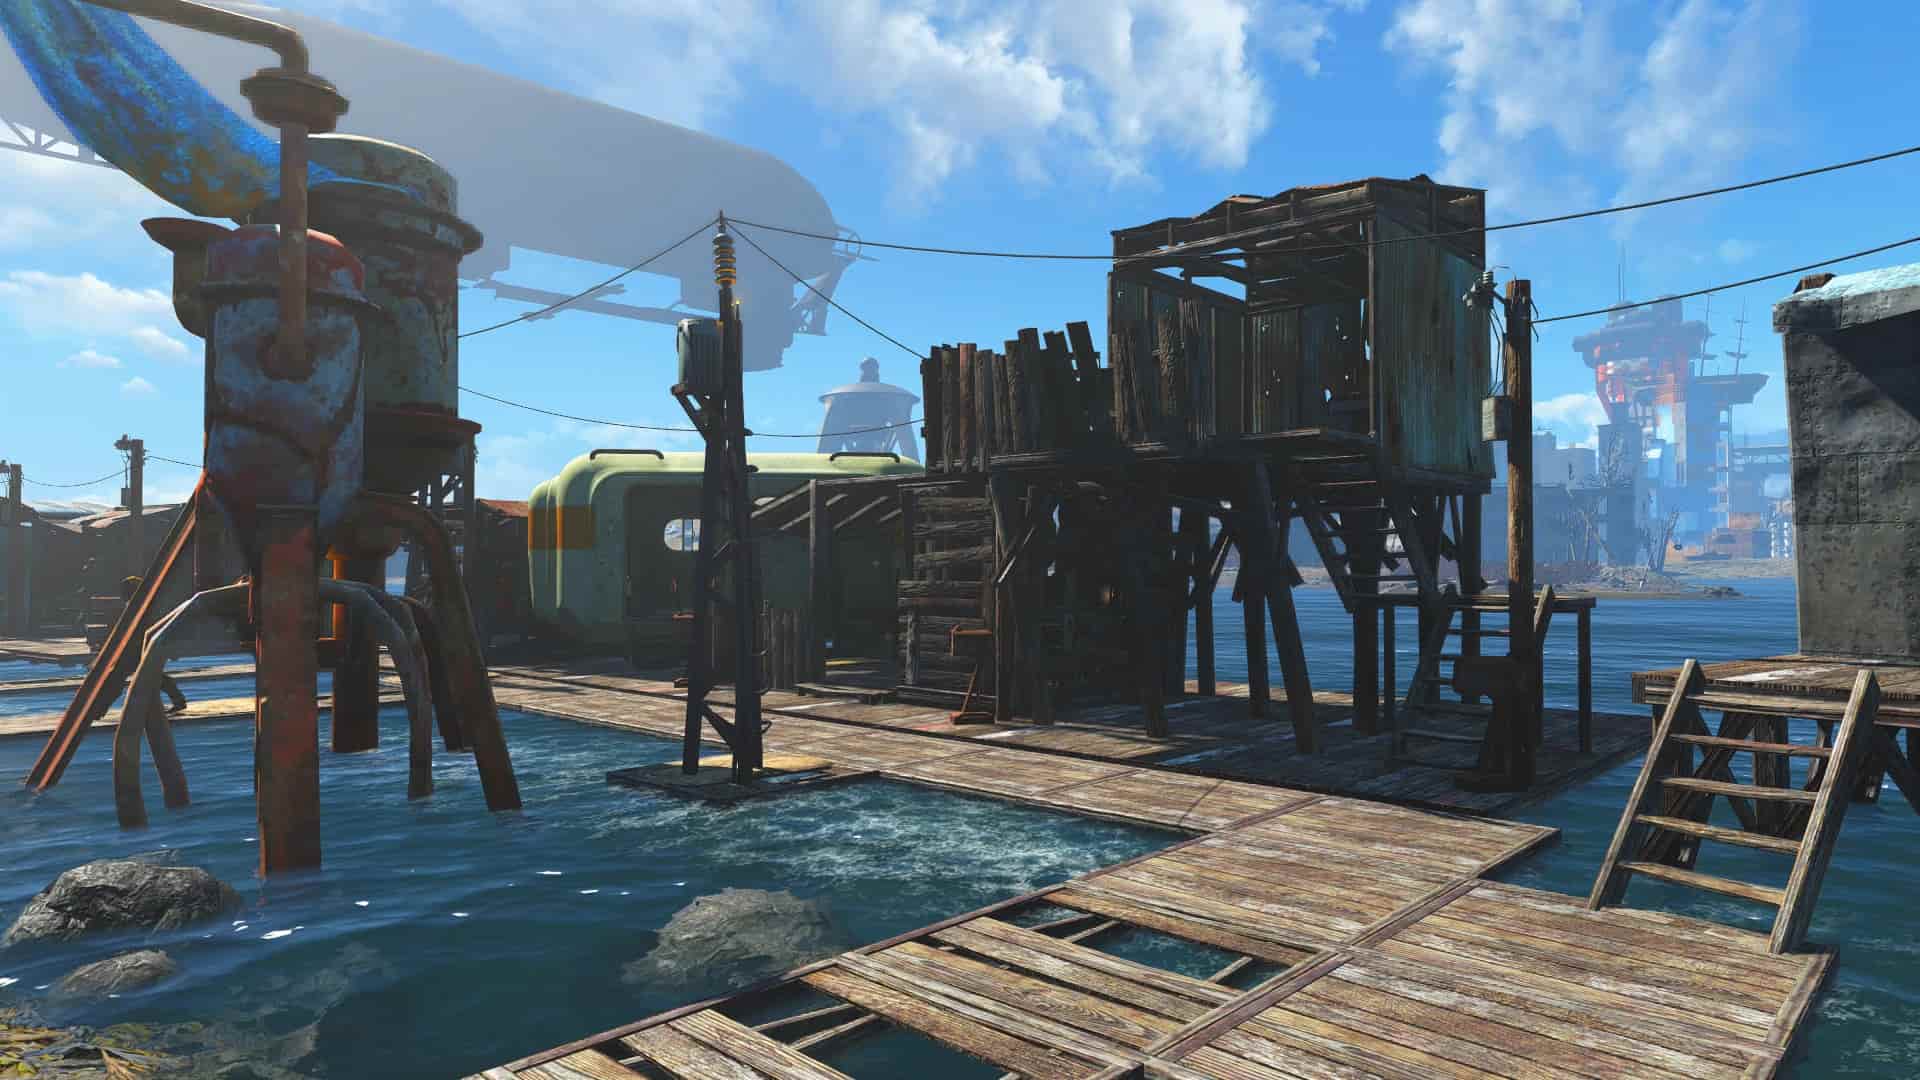 A Sim Settlements town in Fallout 4.